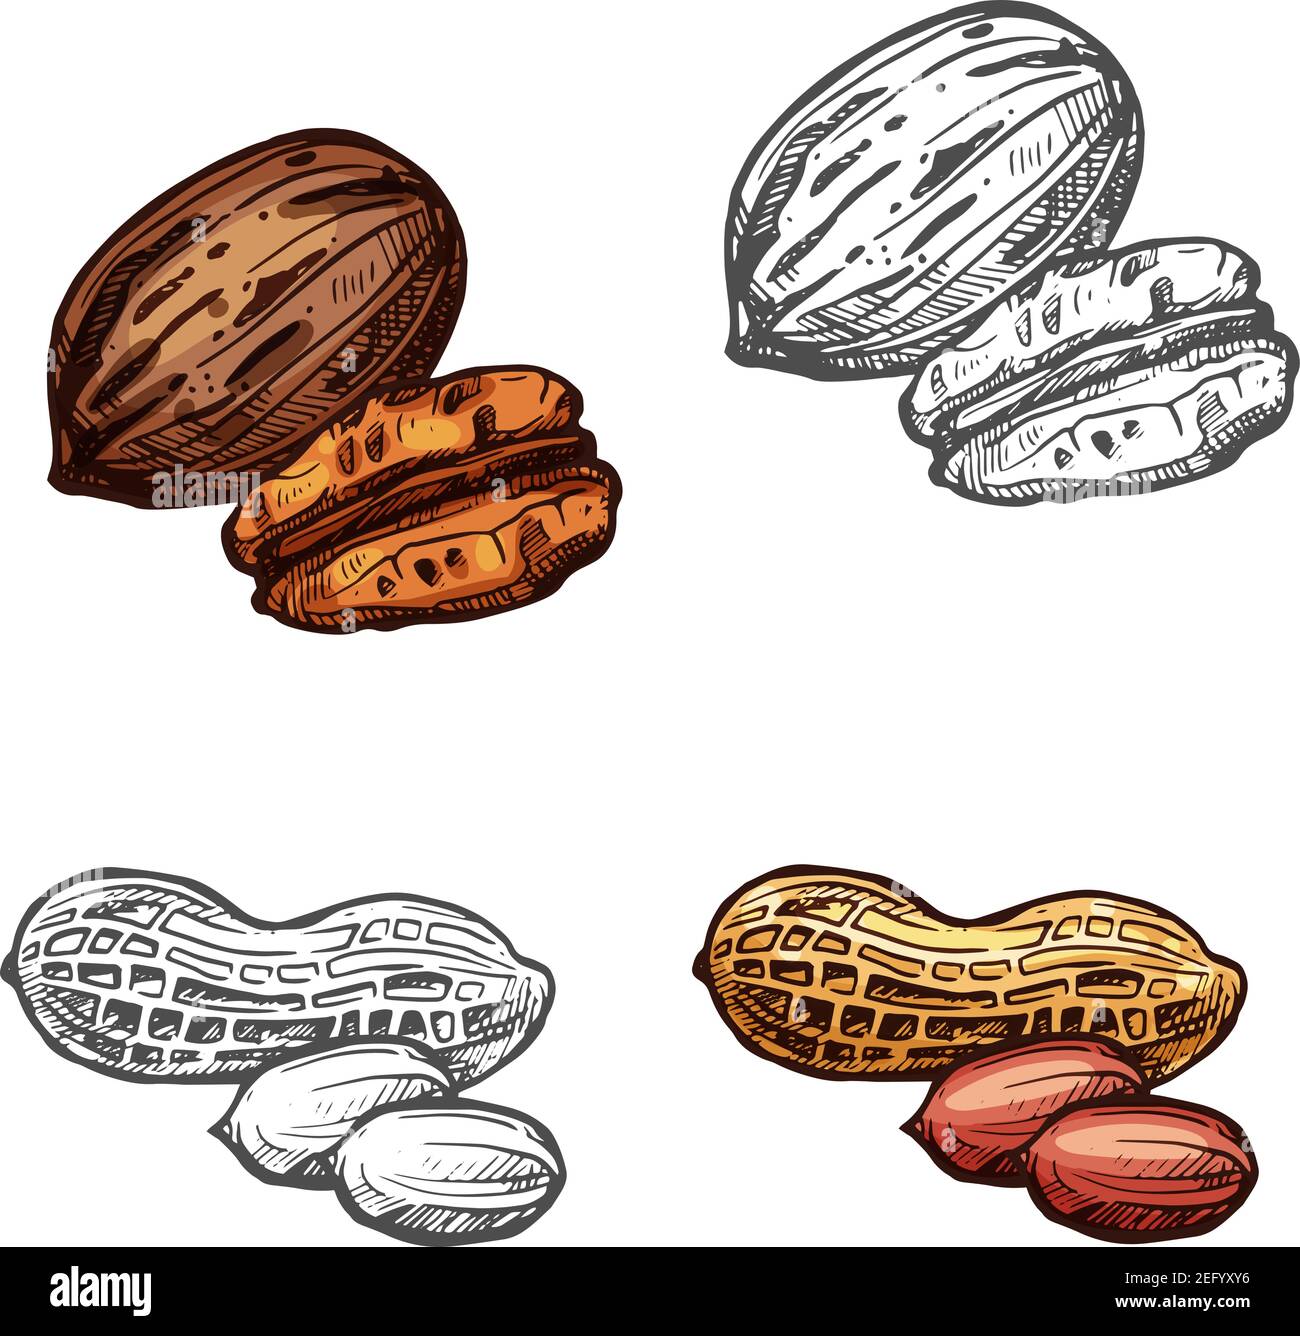 Sketch Peanut Vector Images over 1100